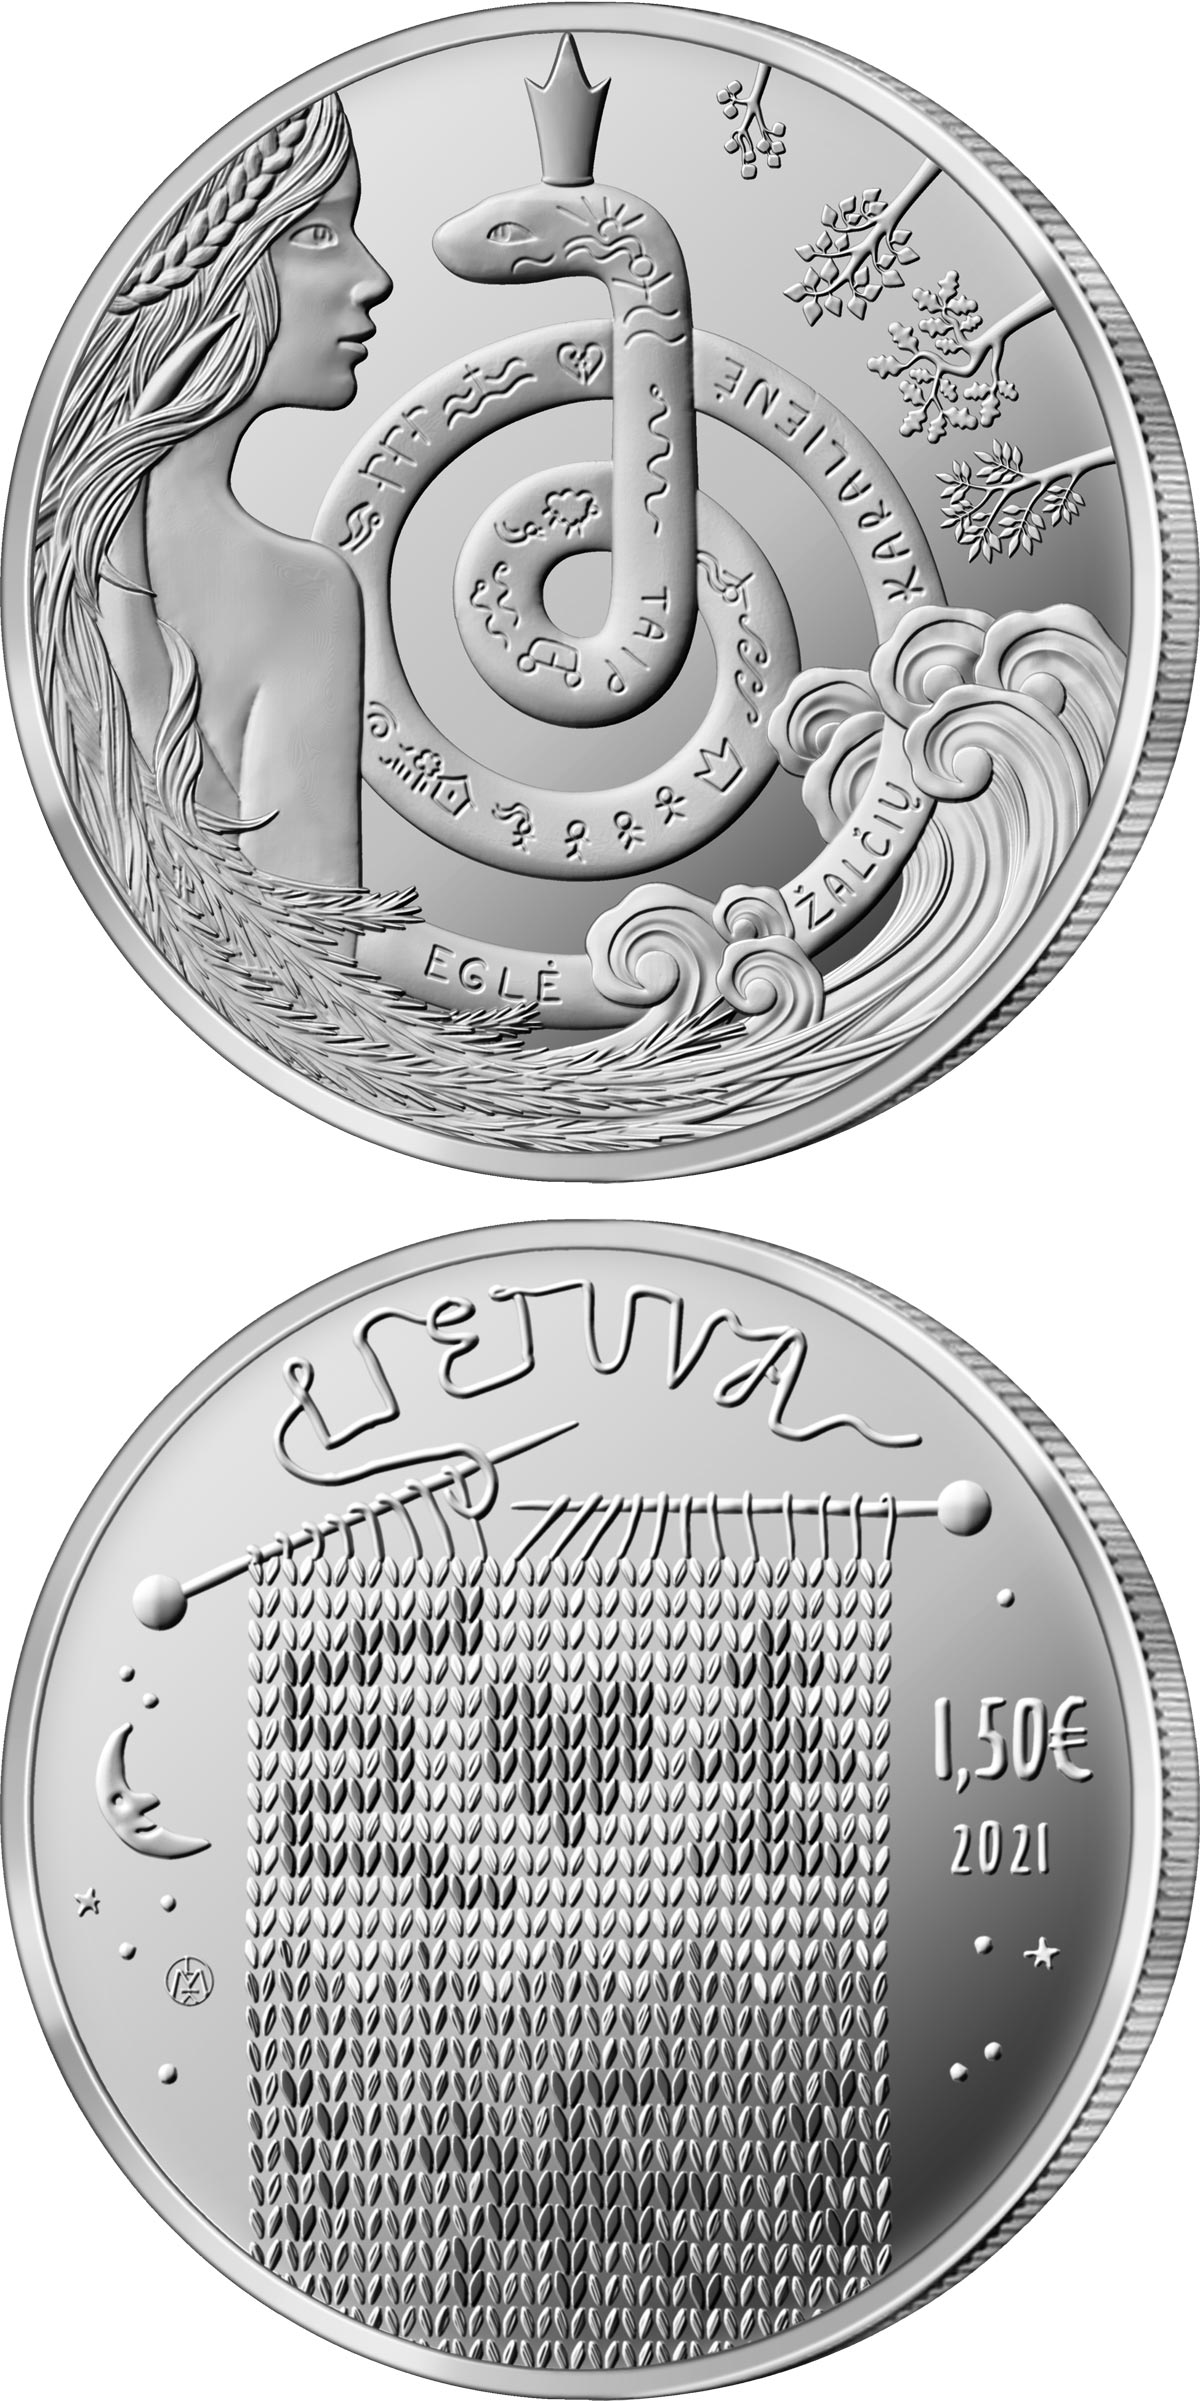 Image of 1.5 euro coin - Eglė - Queen of Serpents | Lithuania 2021.  The Copper–Nickel (CuNi) coin is of UNC quality.